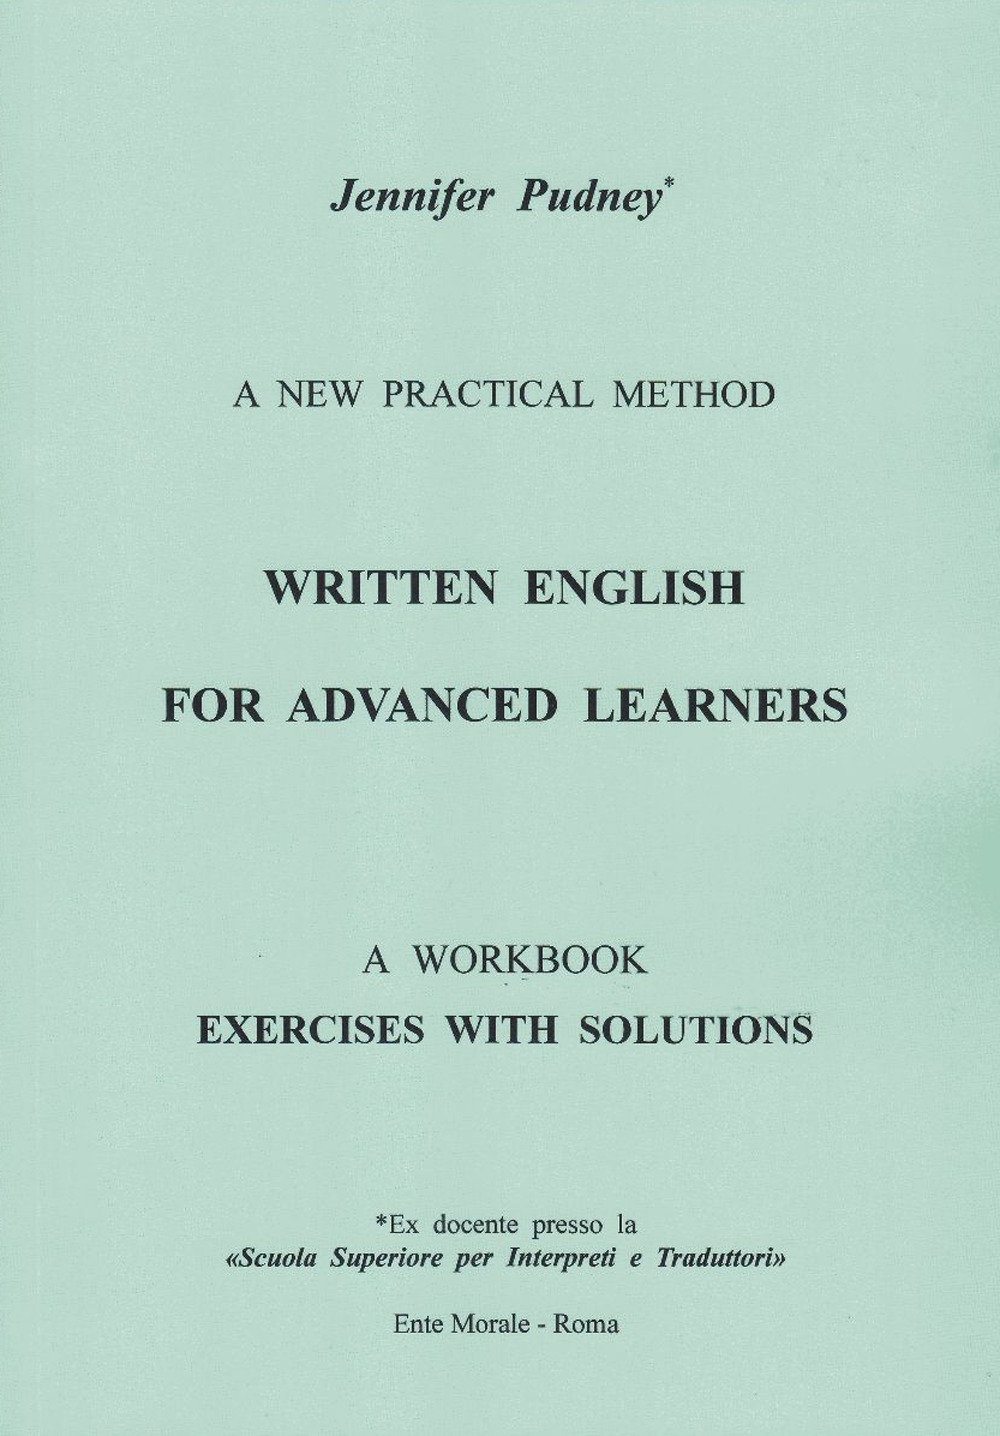 Written english for advanced learners. A new practical method. A workbook exercises with solutions. Ediz. bilingue